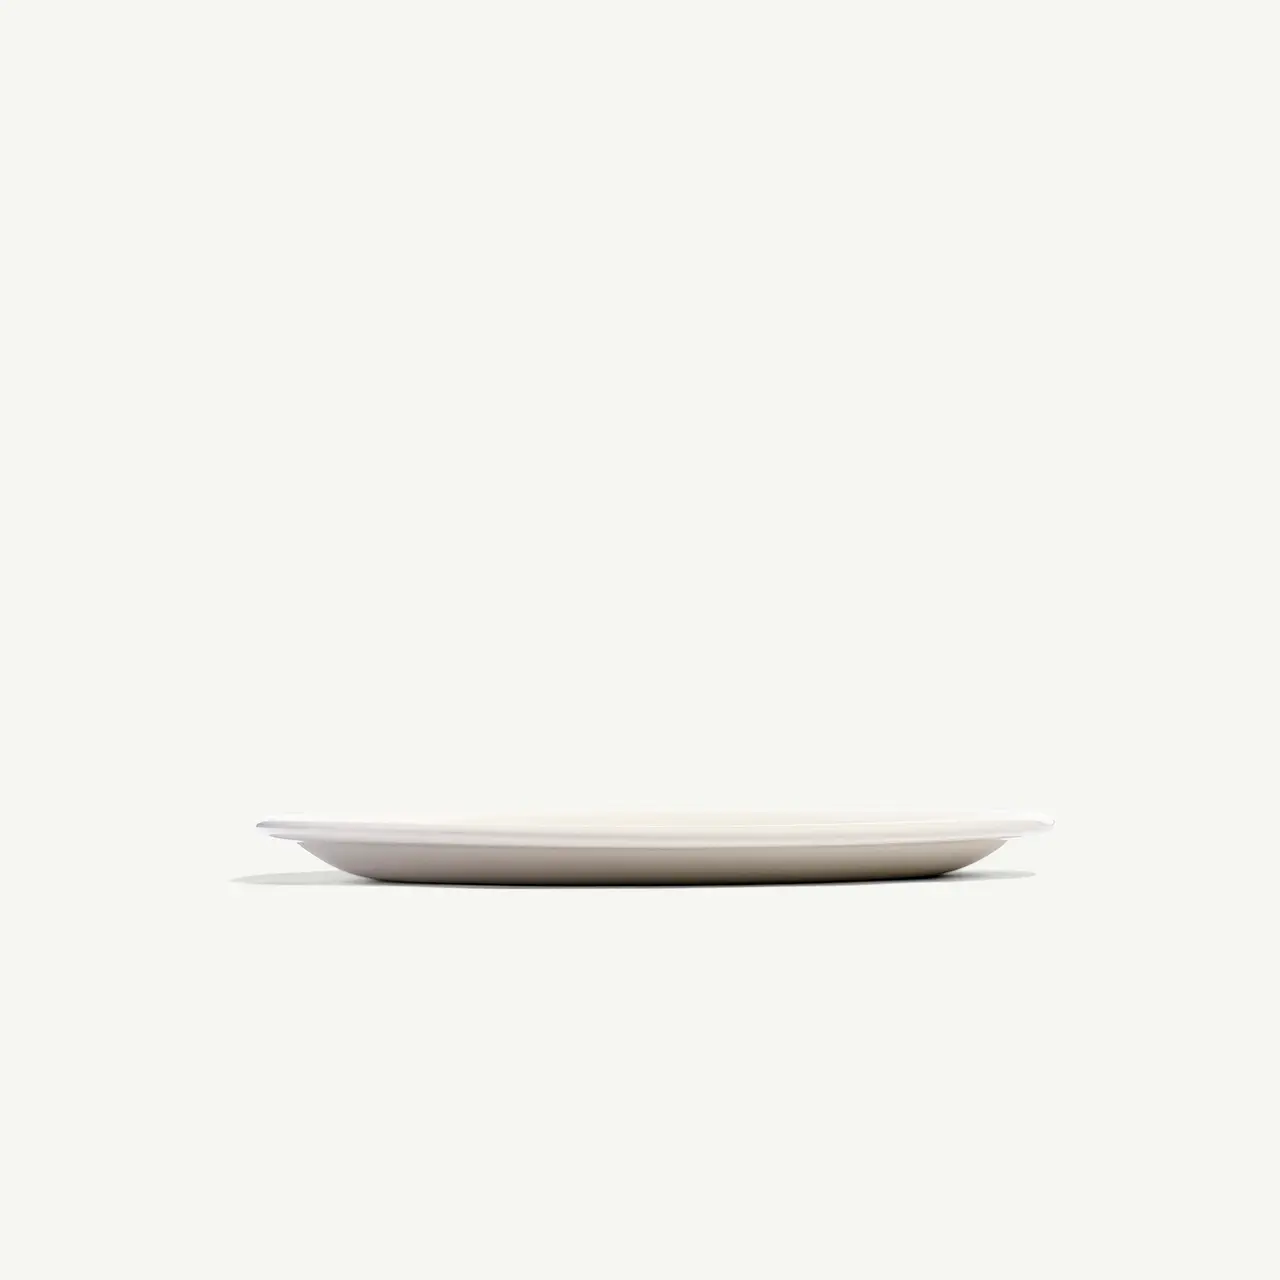 A simple empty white plate is centered on a plain light background.